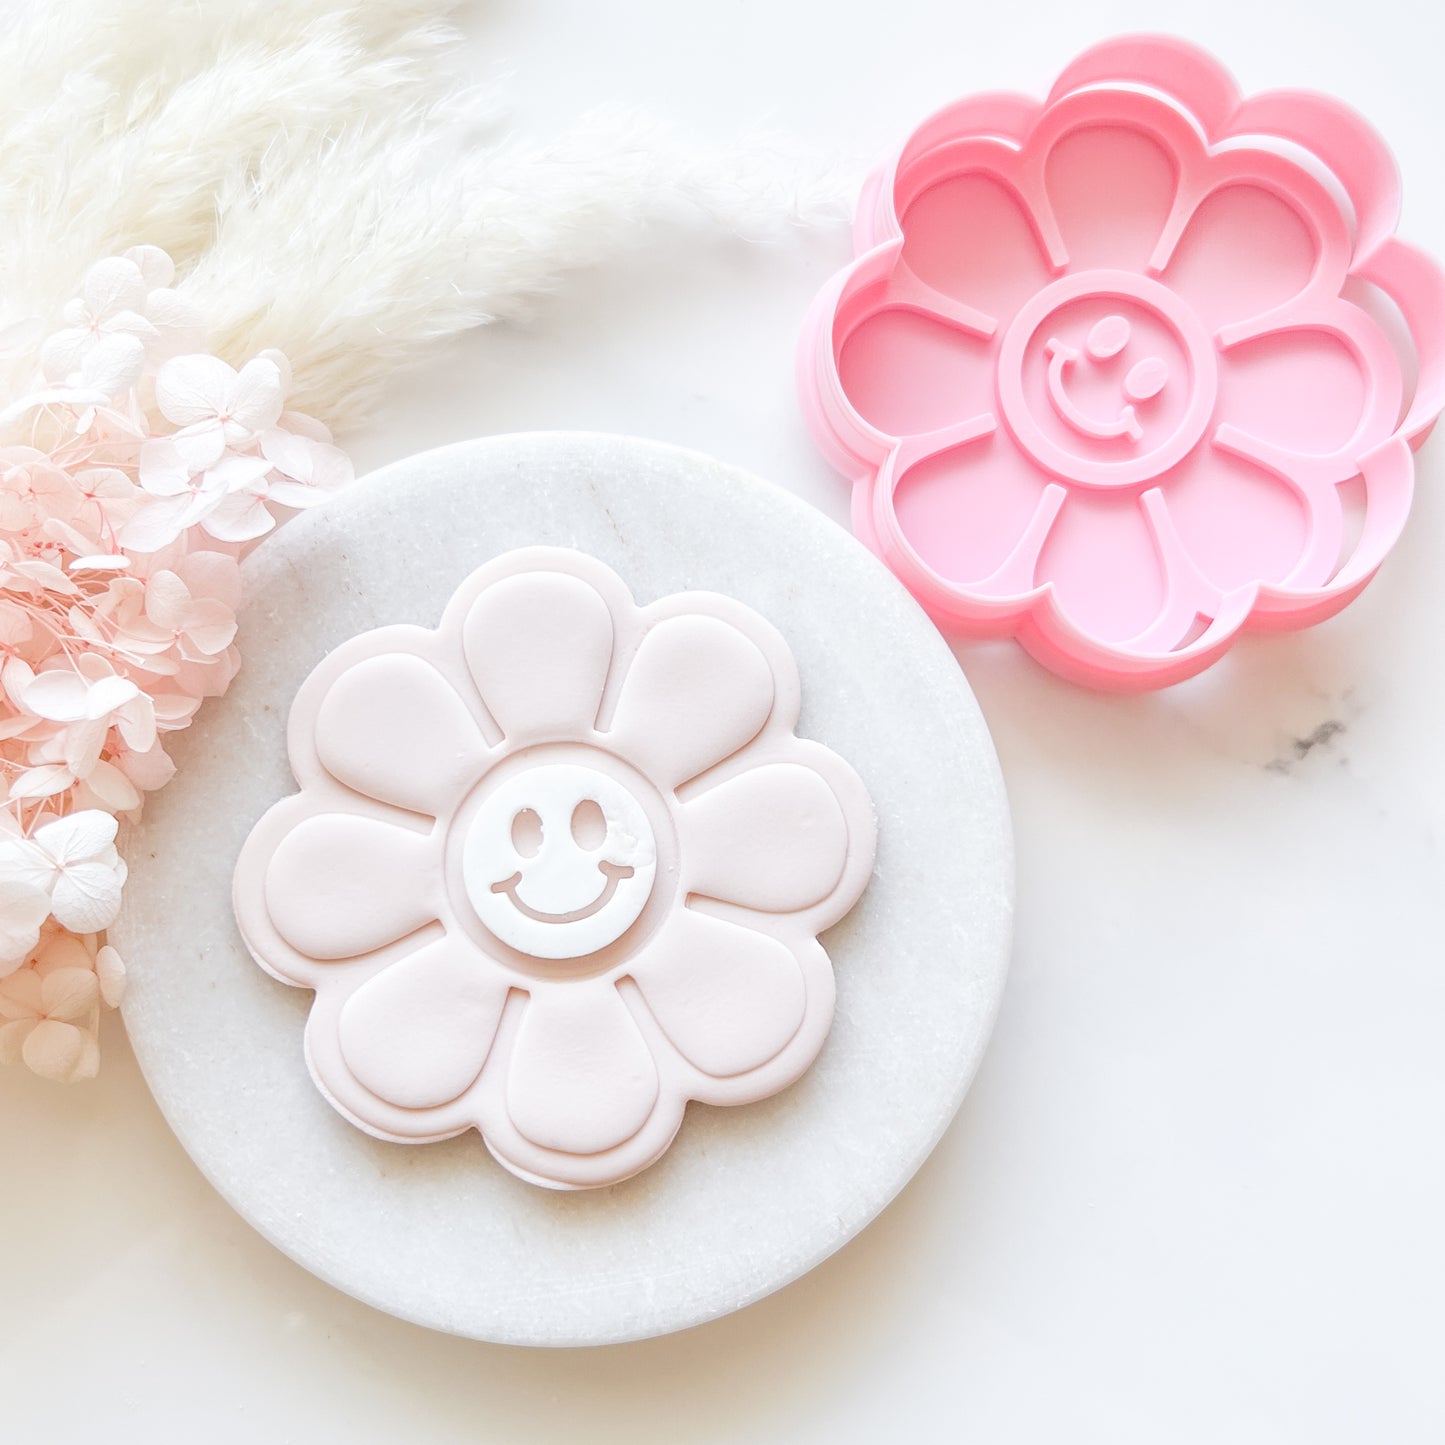 "Smiley Daisy" - Cookie Cutter & Stamp